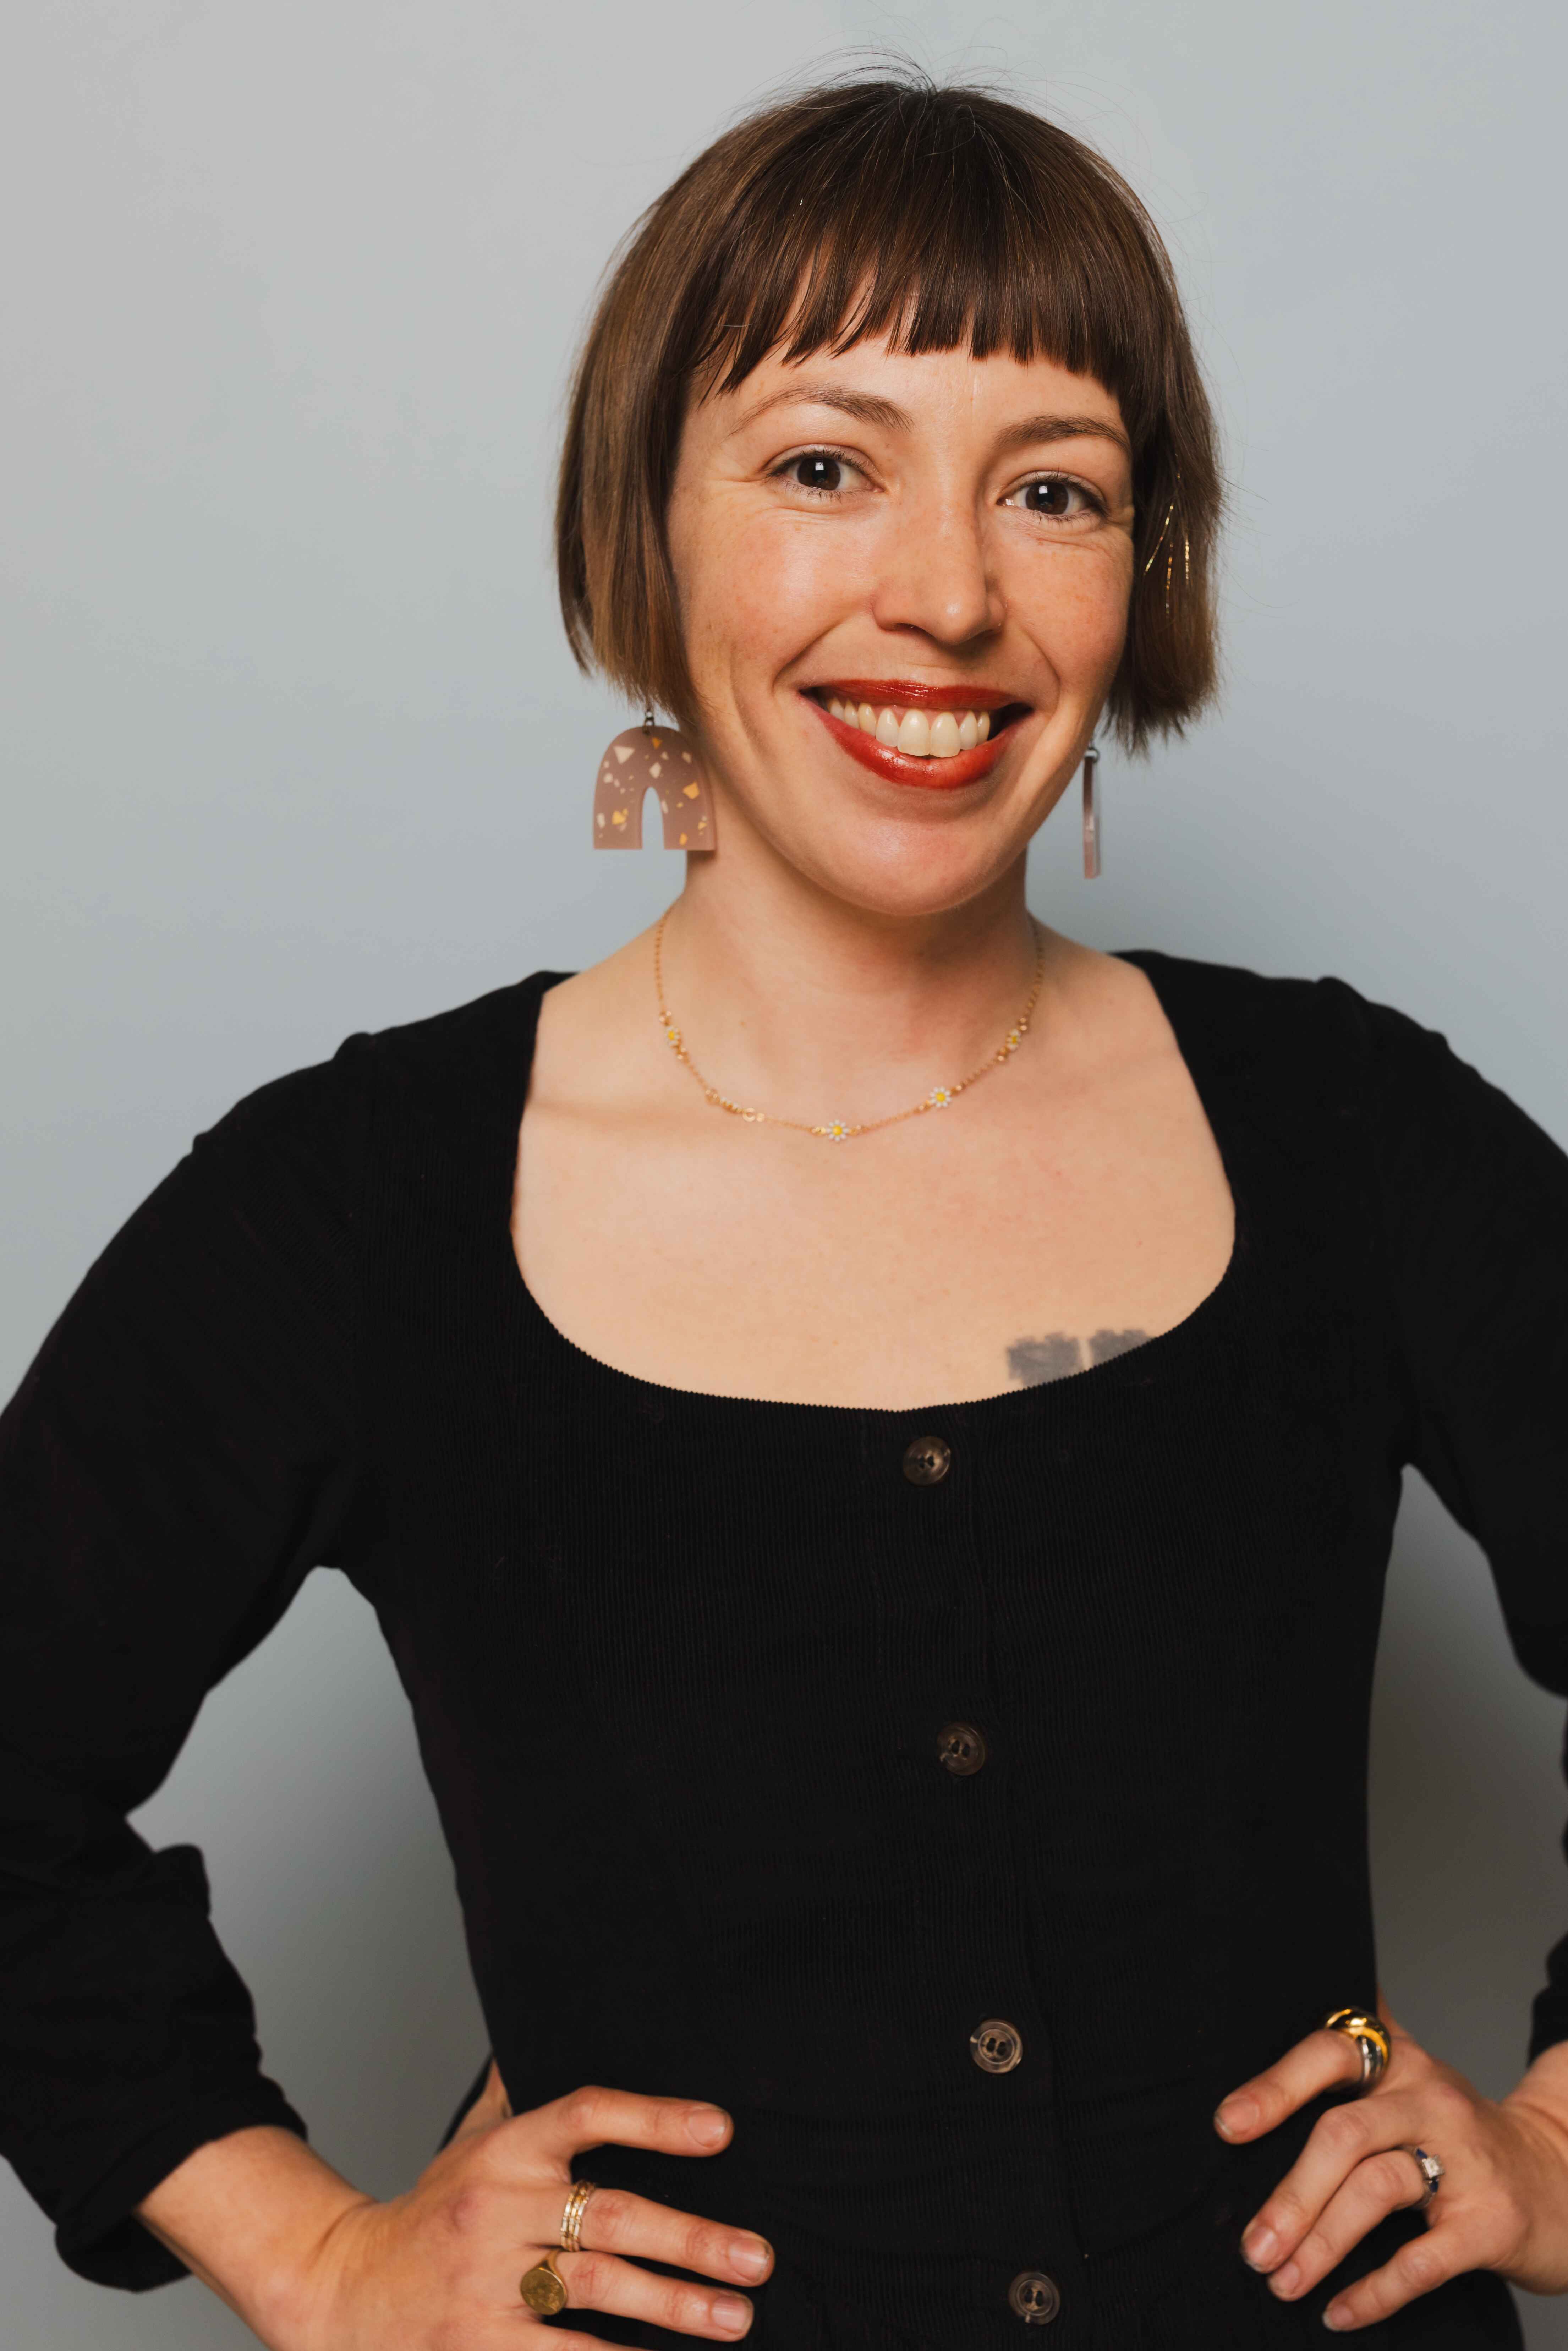 Headshot of Ashley Brewer, a white woman with short brown hair. She is wearing a black dress and smiling, with her hands on her hips.